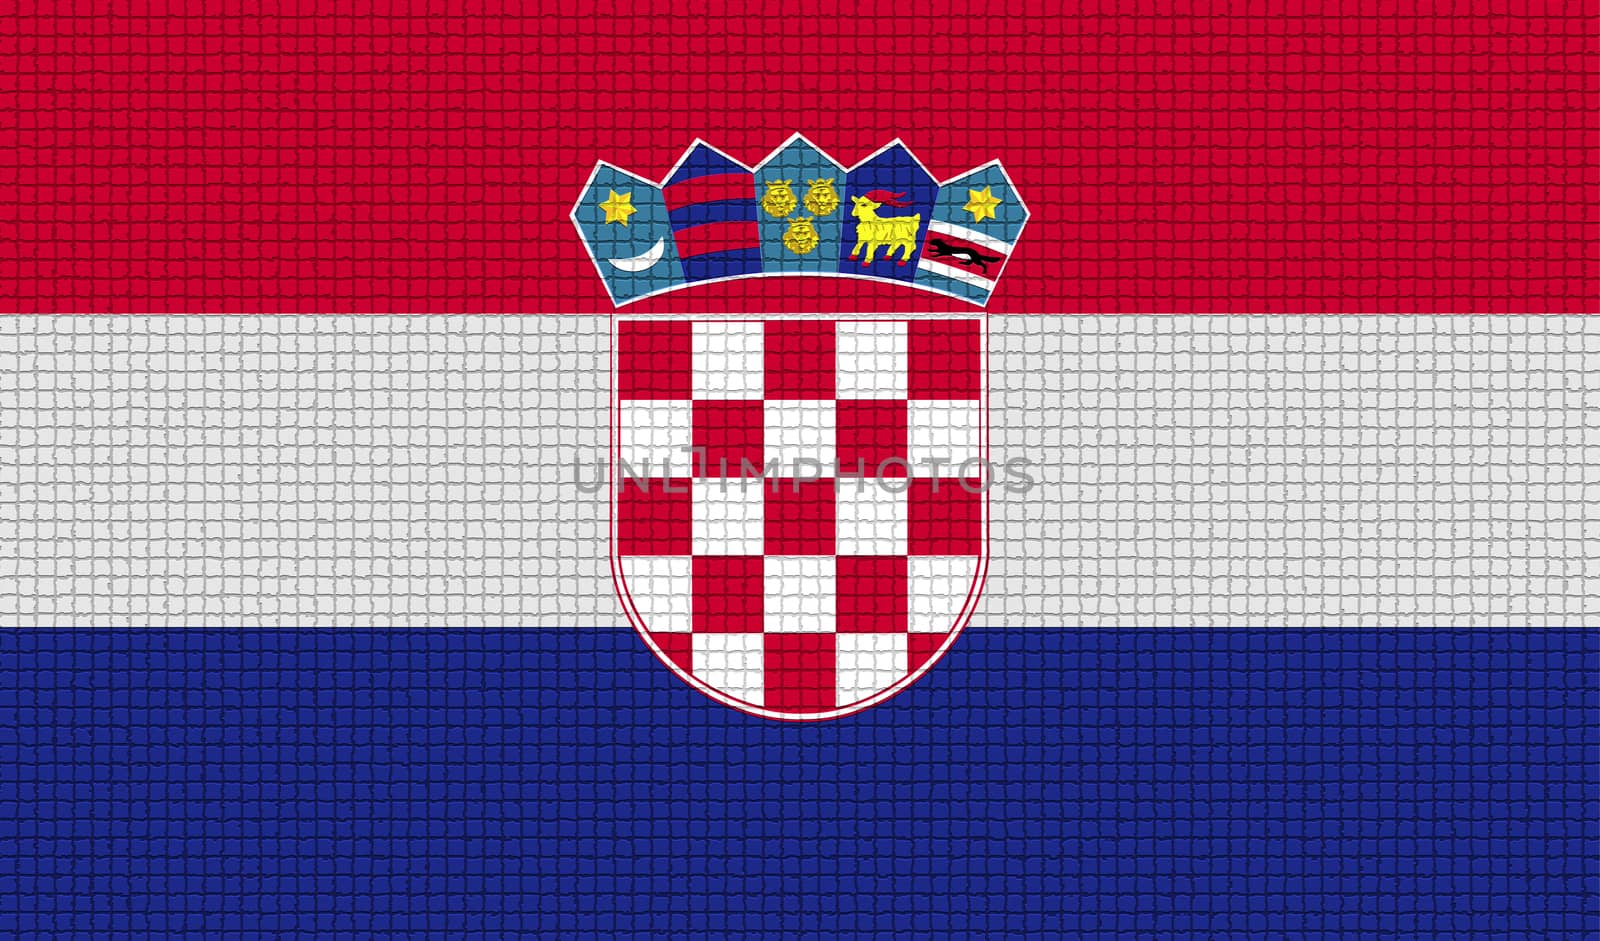 Flags of Croatia with abstract textures. Rasterized version